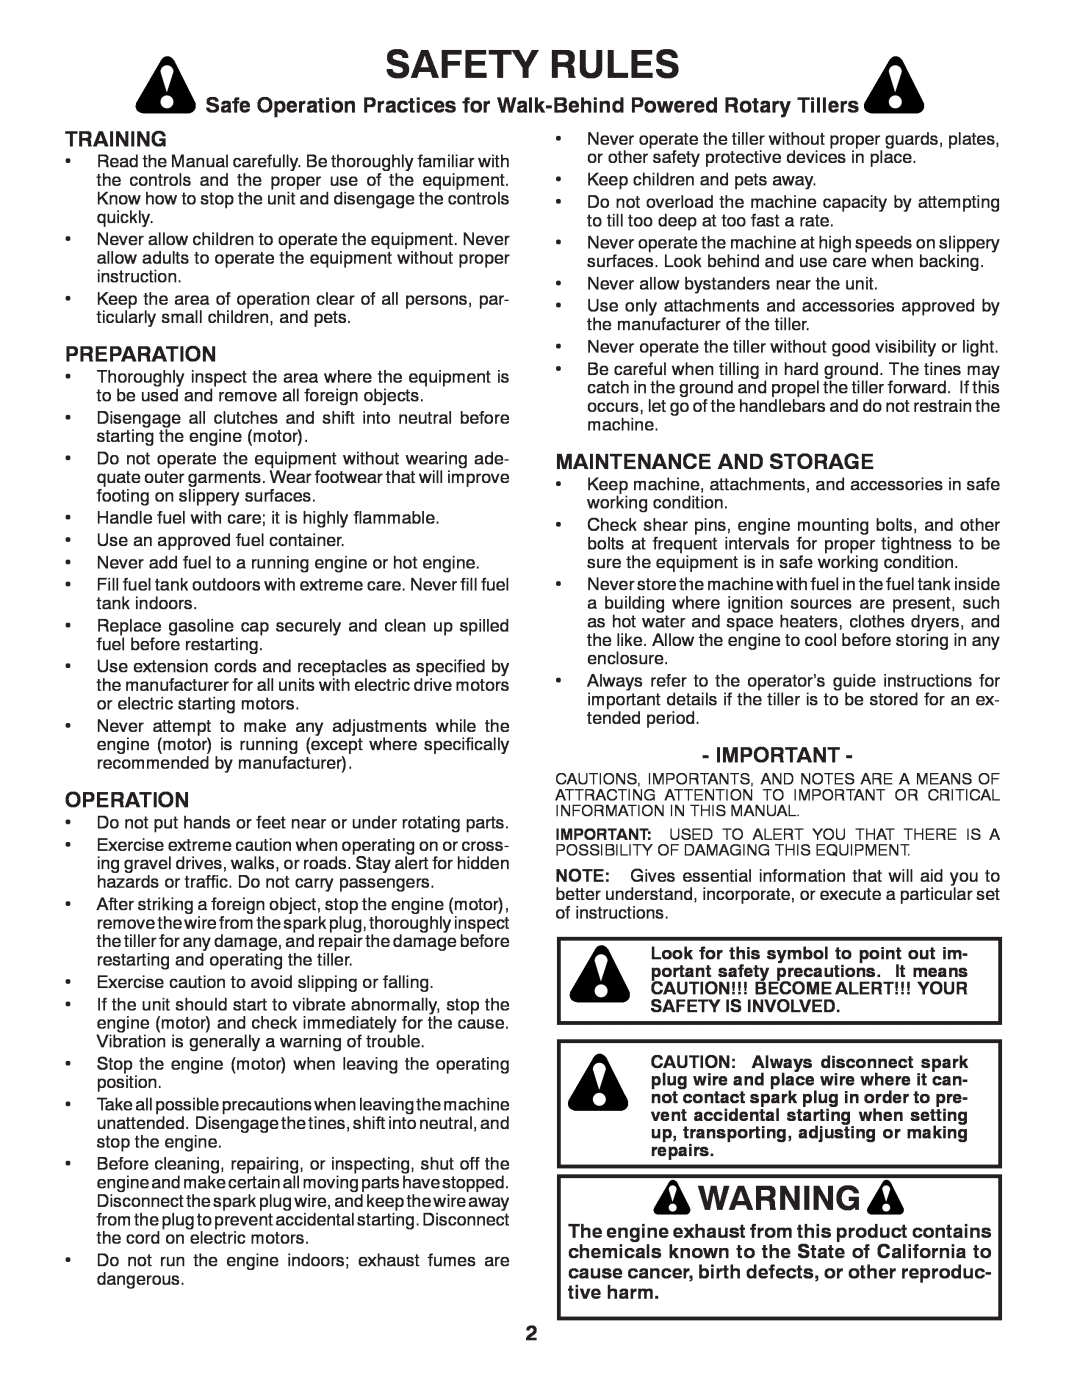 Poulan 417150 manual Safety Rules, Safe Operation Practices for Walk-Behind Powered Rotary Tillers, Training, Preparation 